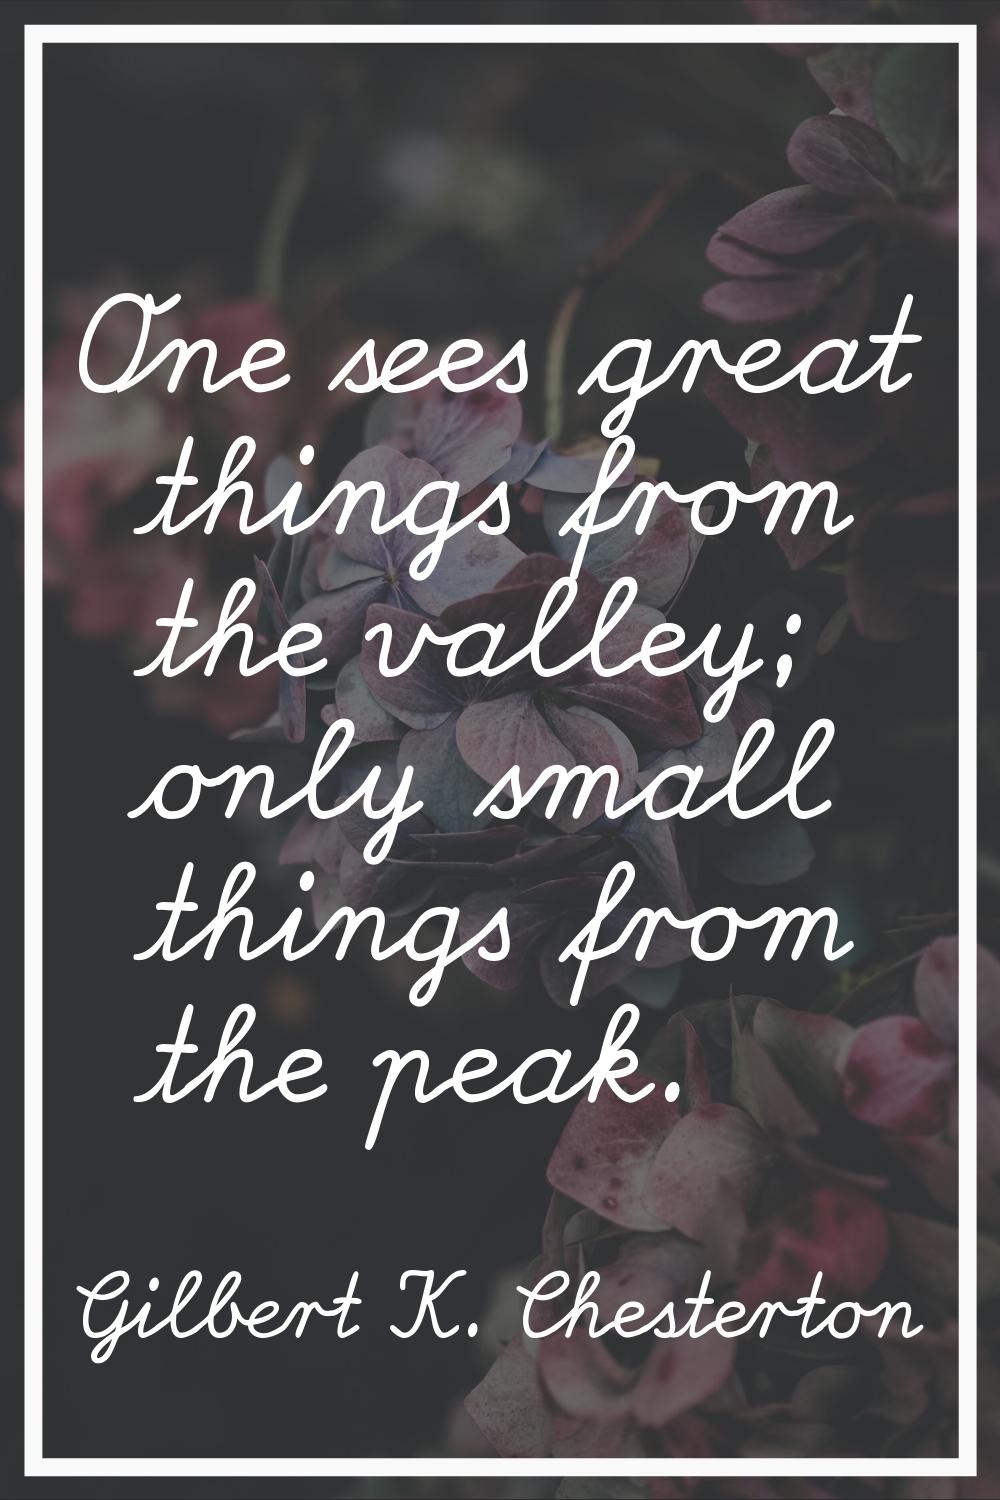 One sees great things from the valley; only small things from the peak.